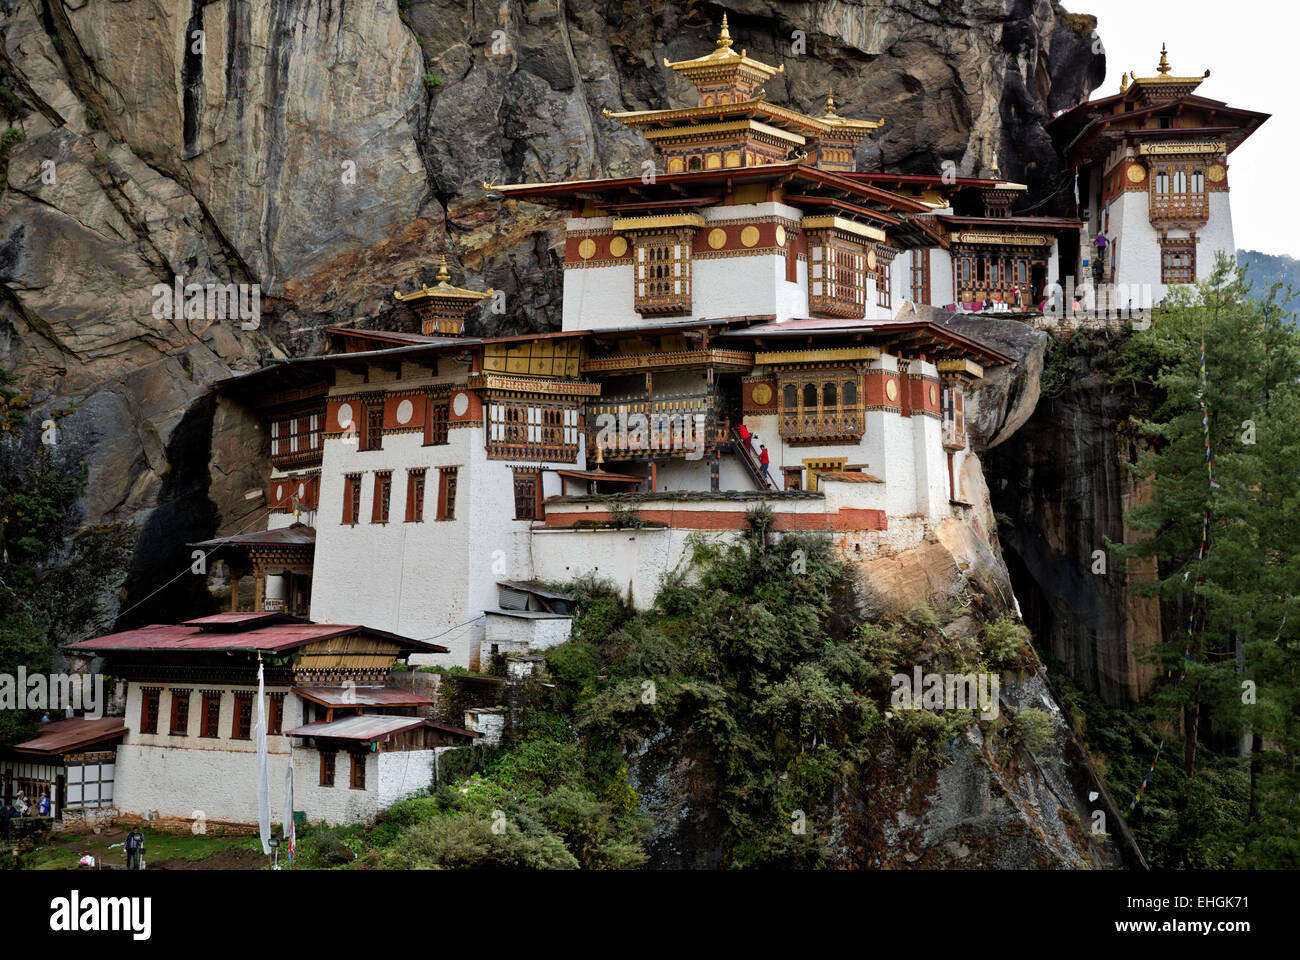 BHUTAN - Taktshang Goemba, (the Tiger's Nest Monastery), perched on the side of a cliff high above the Paro River Valley. Stock Photo